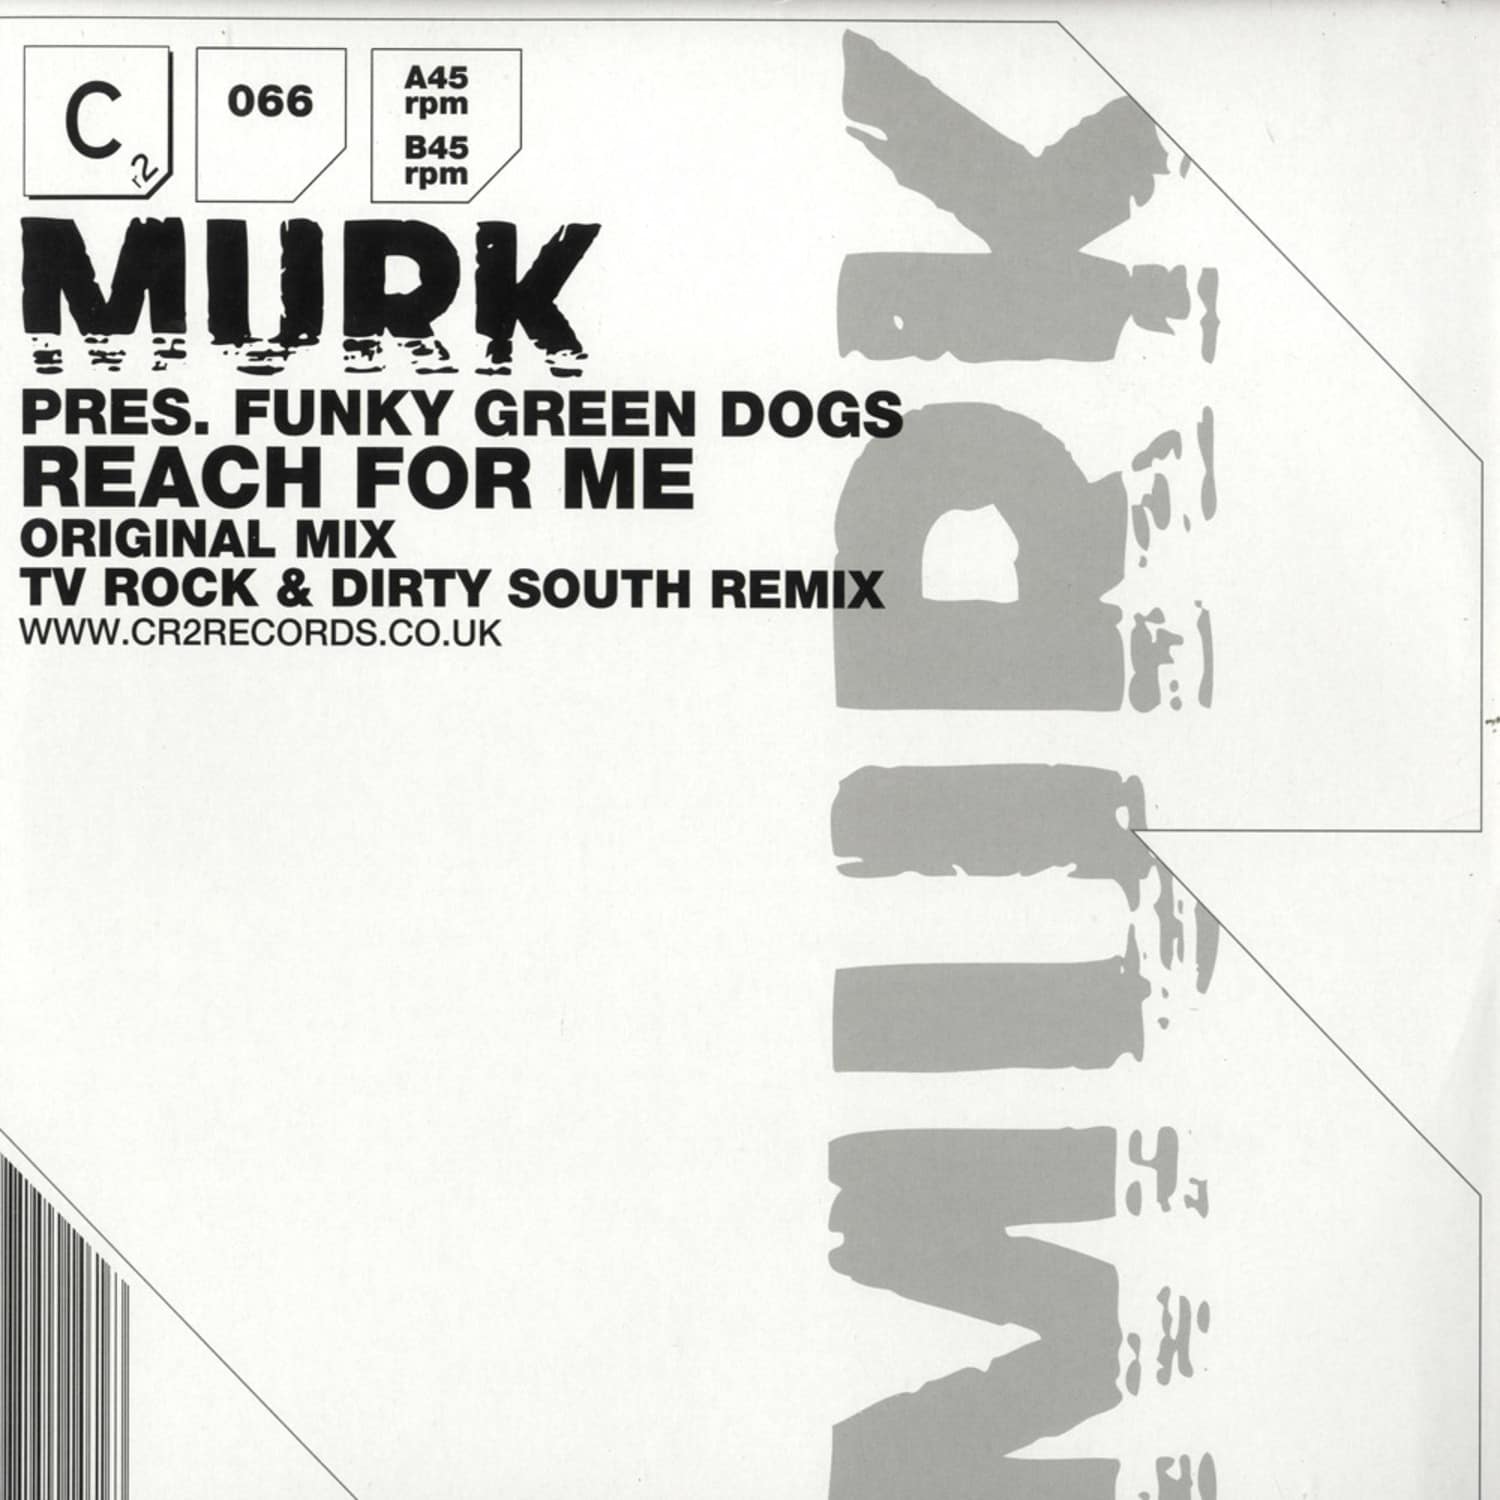 Murk pres. Funky Green Dogs - REACH FOR ME